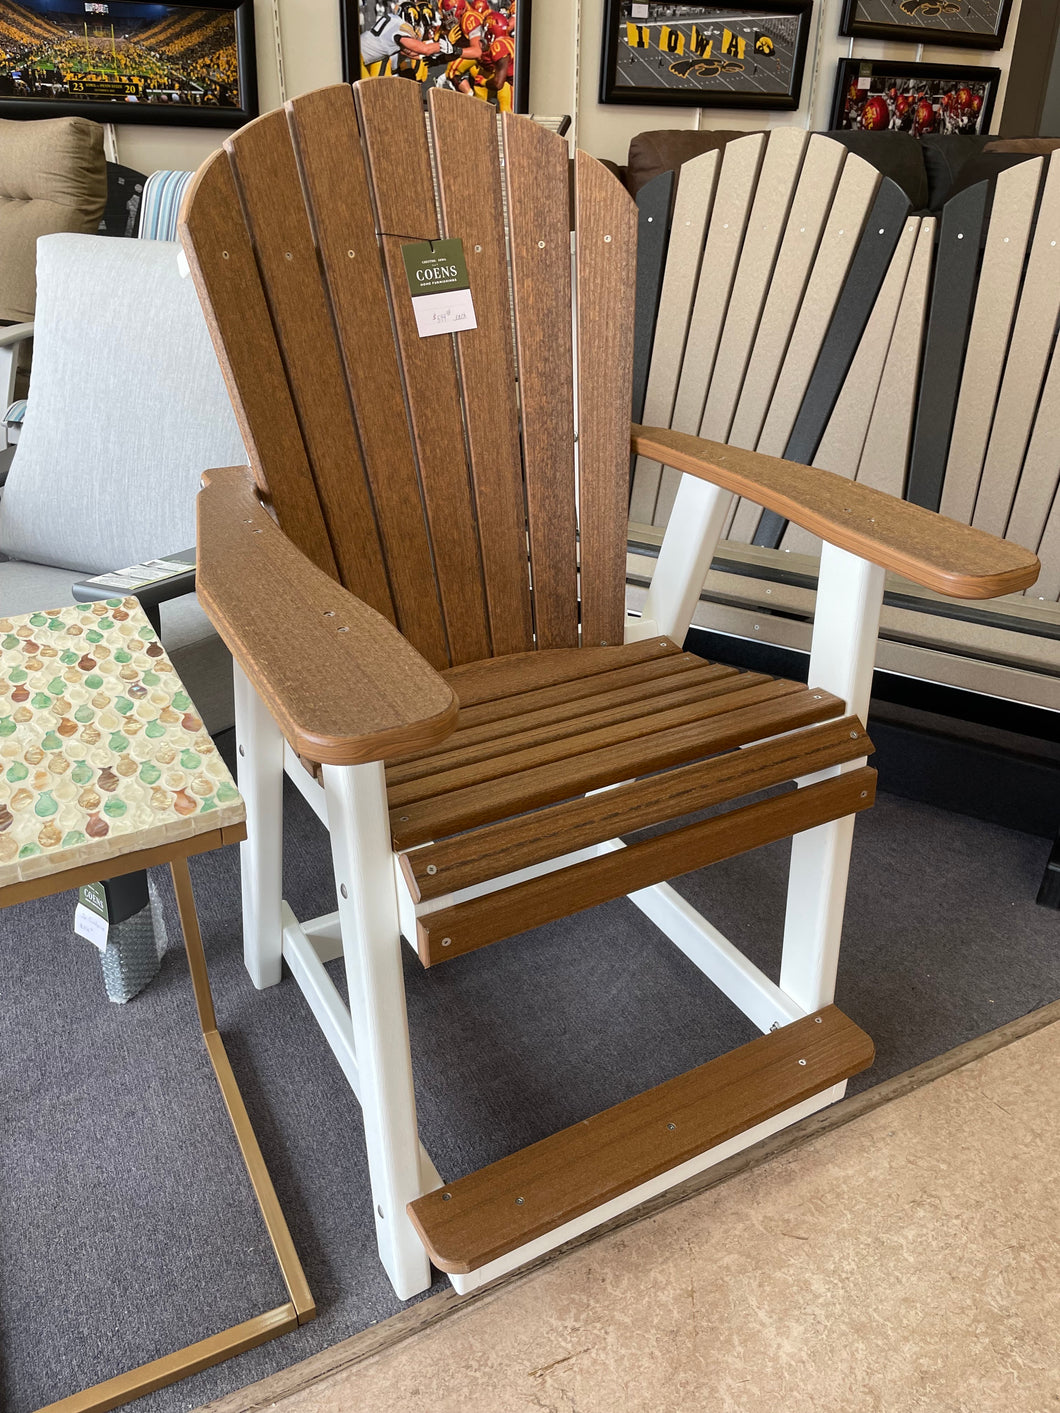 Adirondack Counter Height Dining Chair by Nature's Best ADC-CH-MHWH-SOLID Mahogany Wood Grain on White Solid